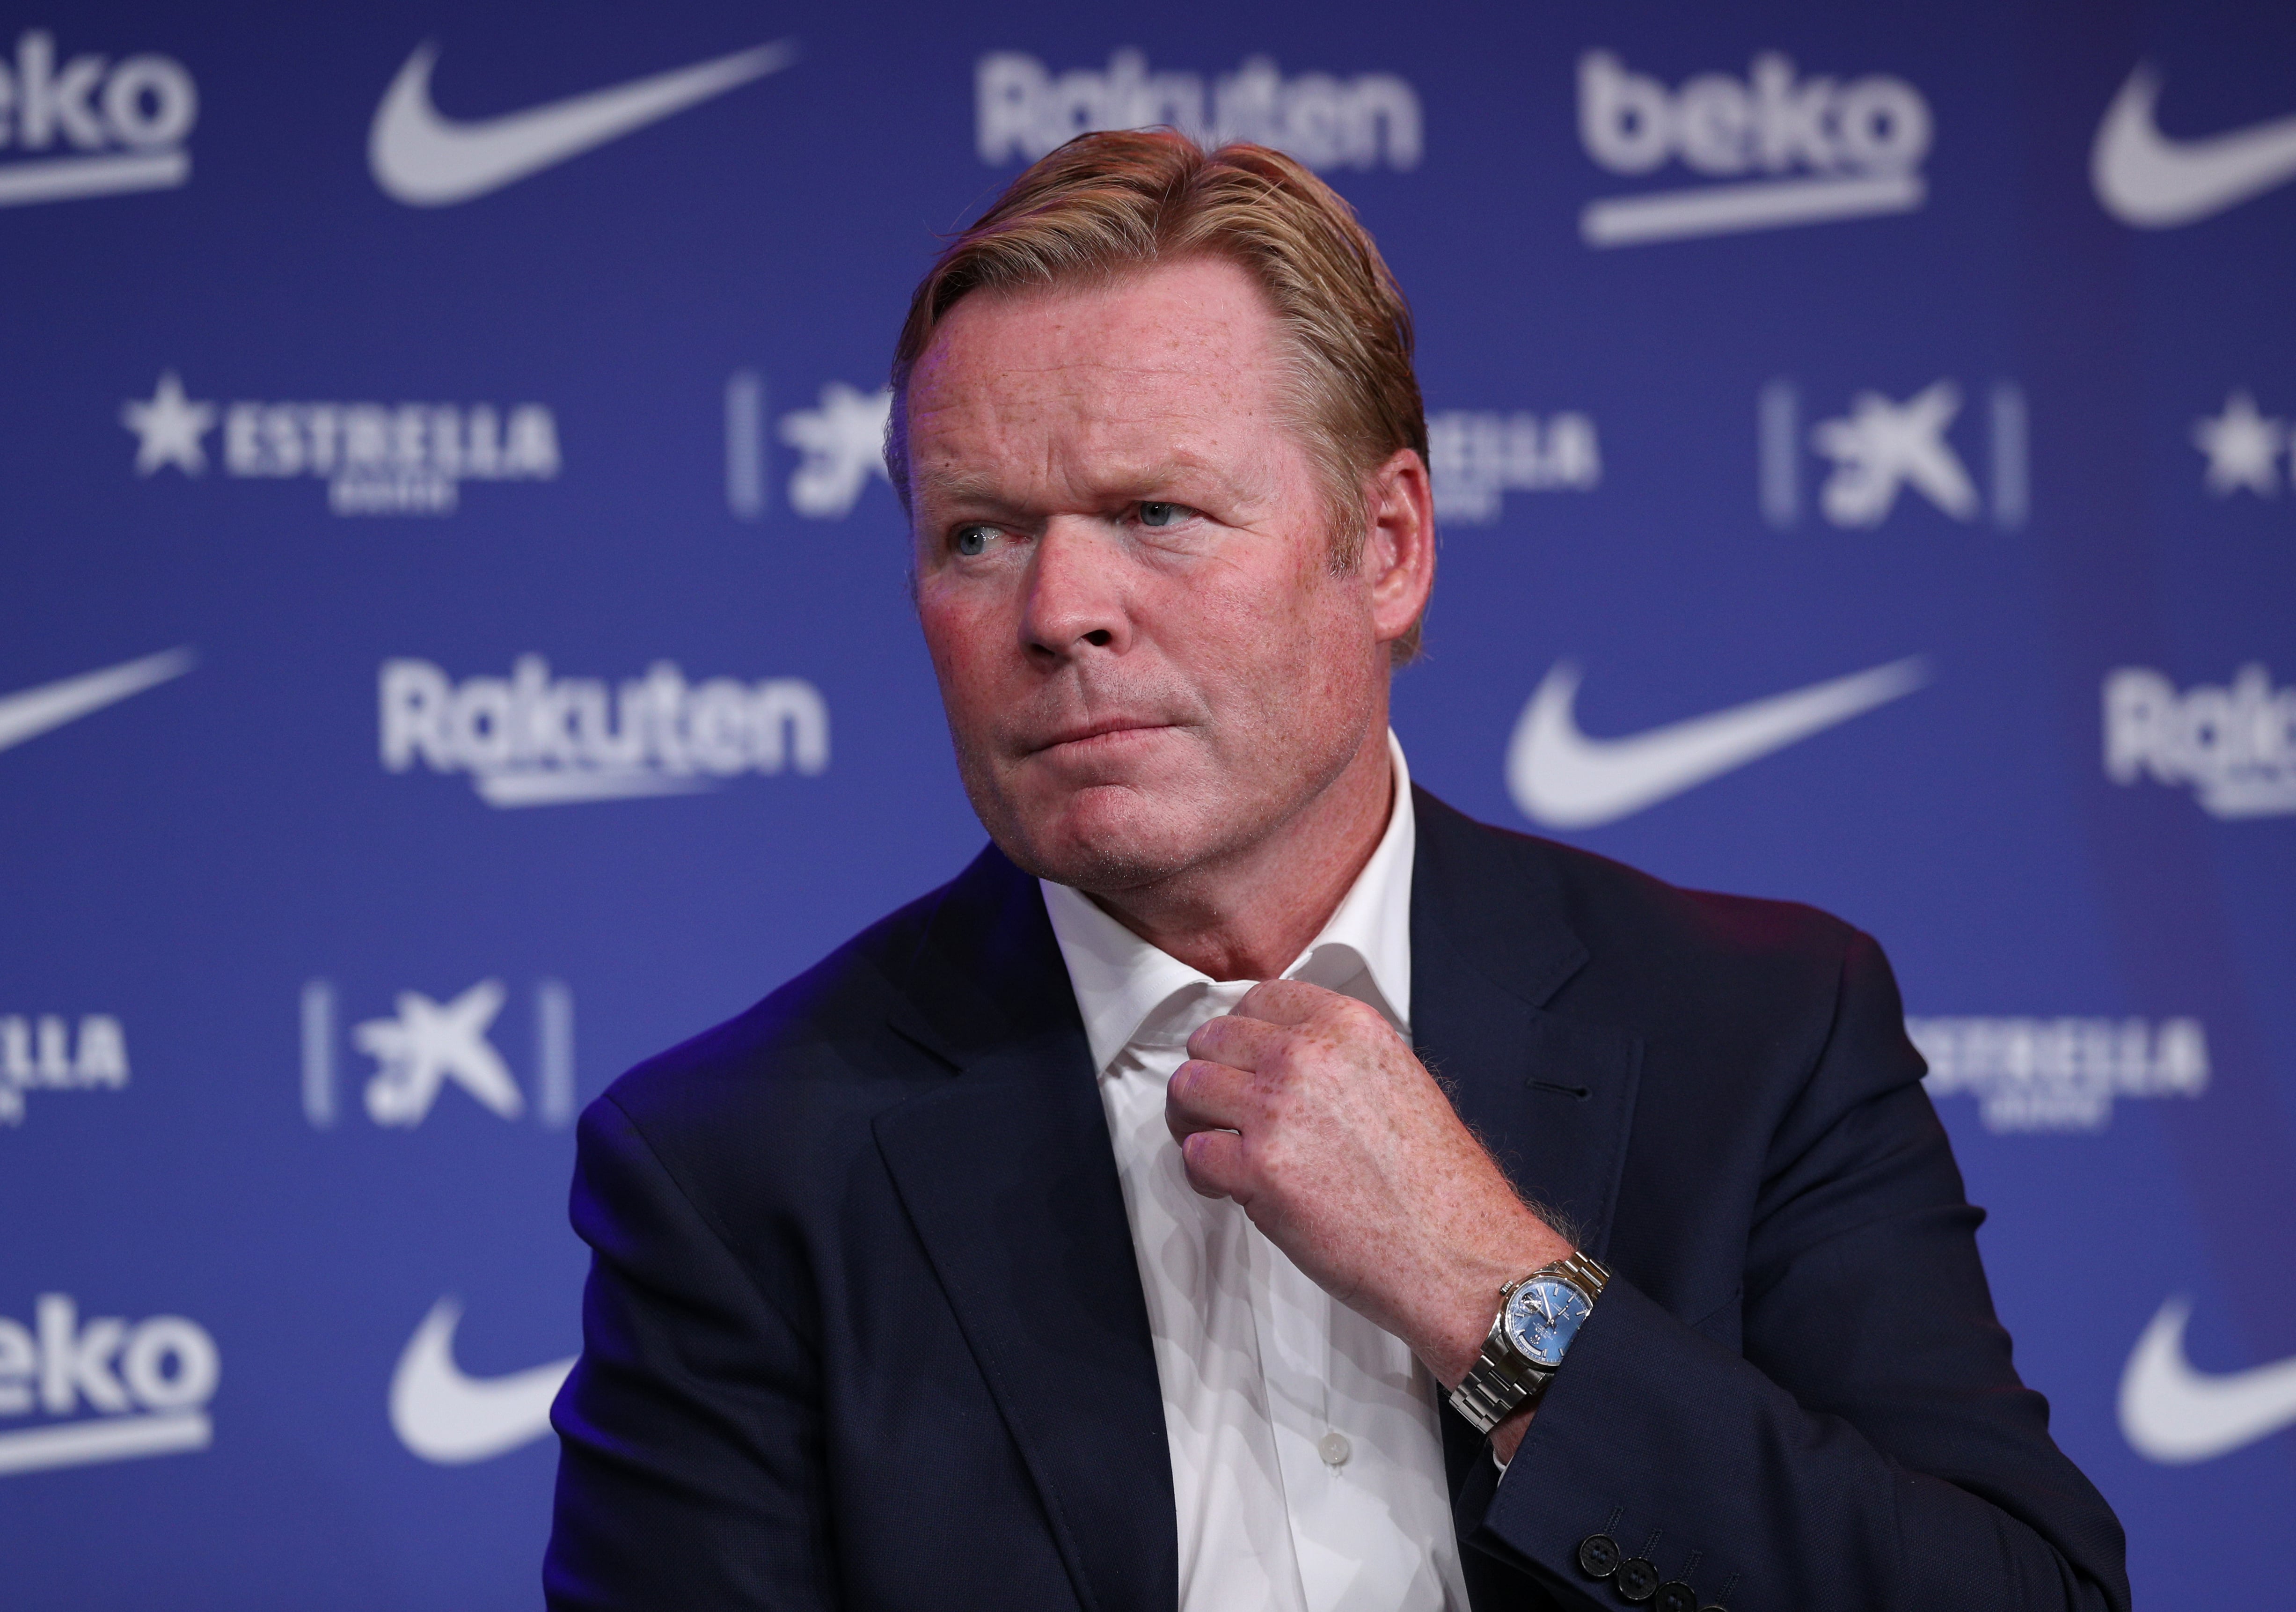 Ronald Koeman during his first press conference as FC Barcelona manager (by REUTERS/Albert Gea)